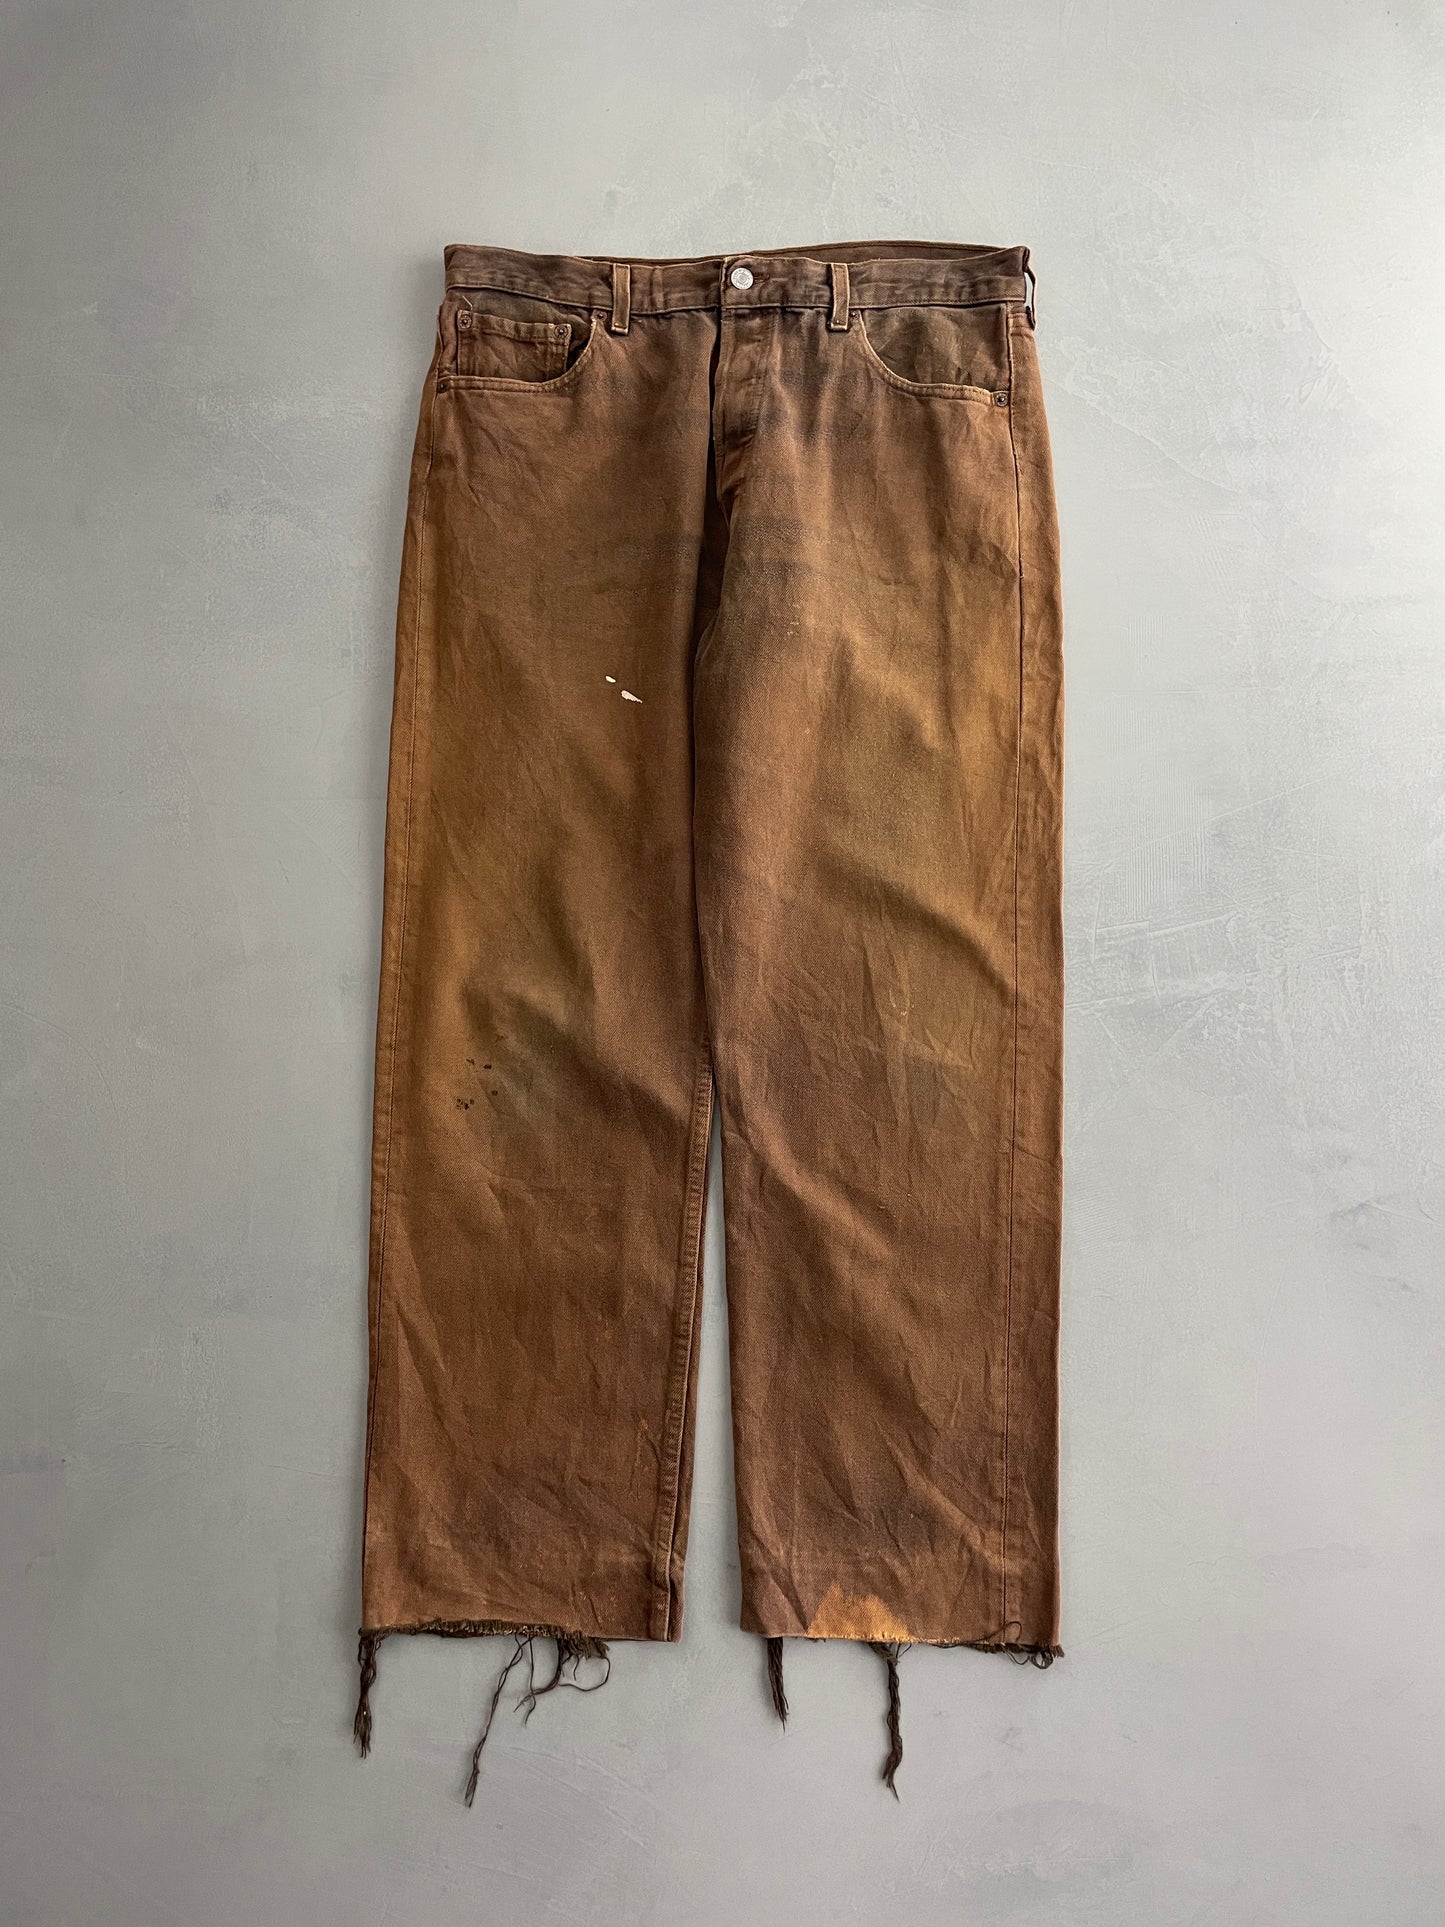 Made in USA Levi's 501's [36"]